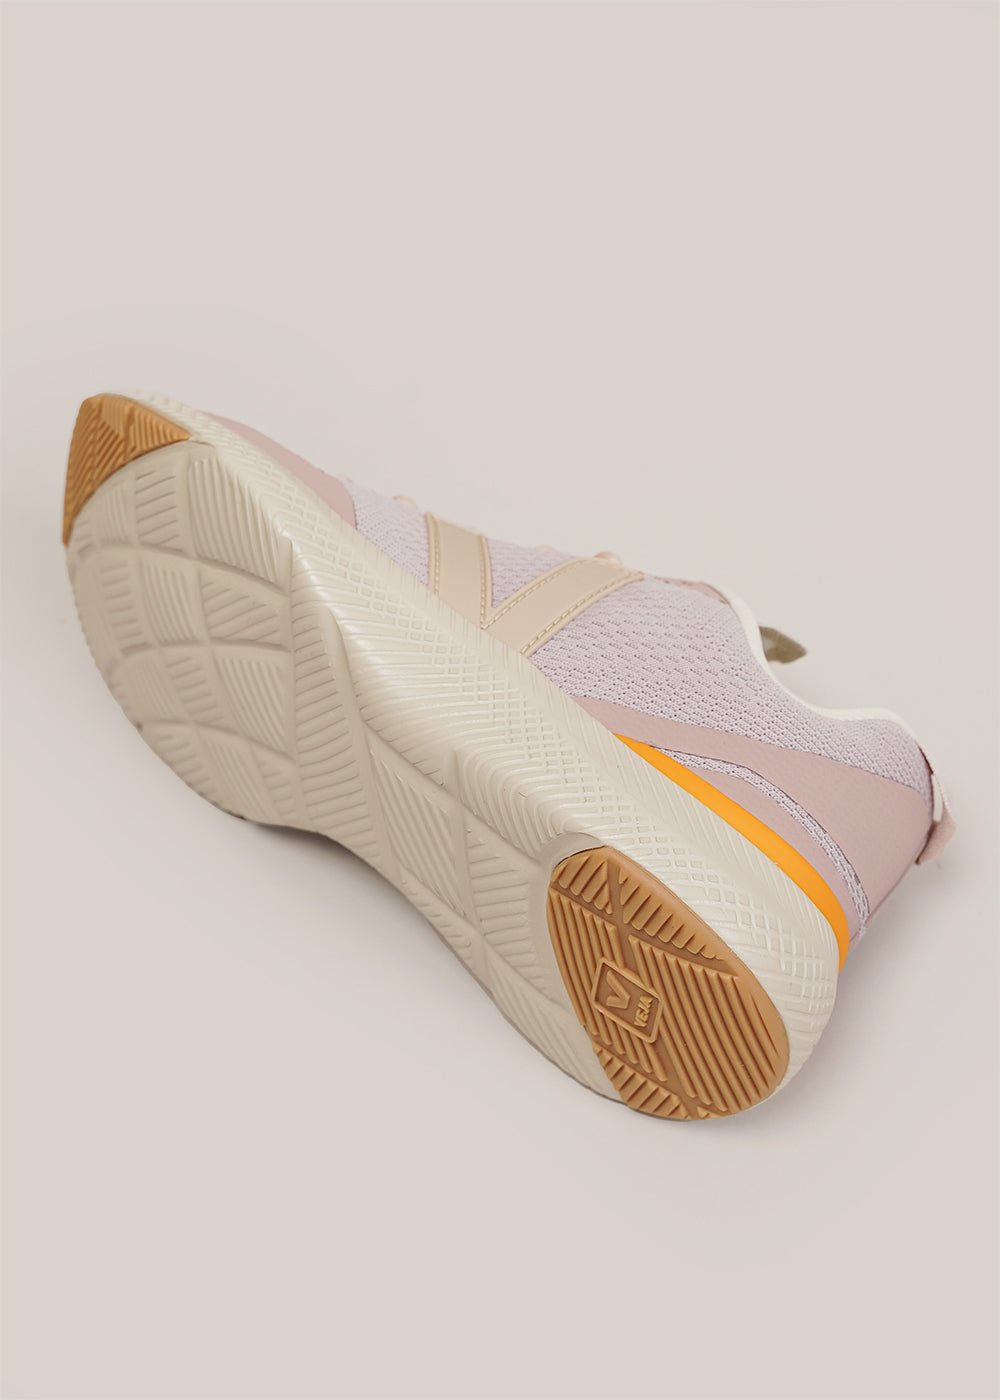 Veja Parme Sable Mesh Impala Running Shoes - New Classics Studios Sustainable Ethical Fashion Canada